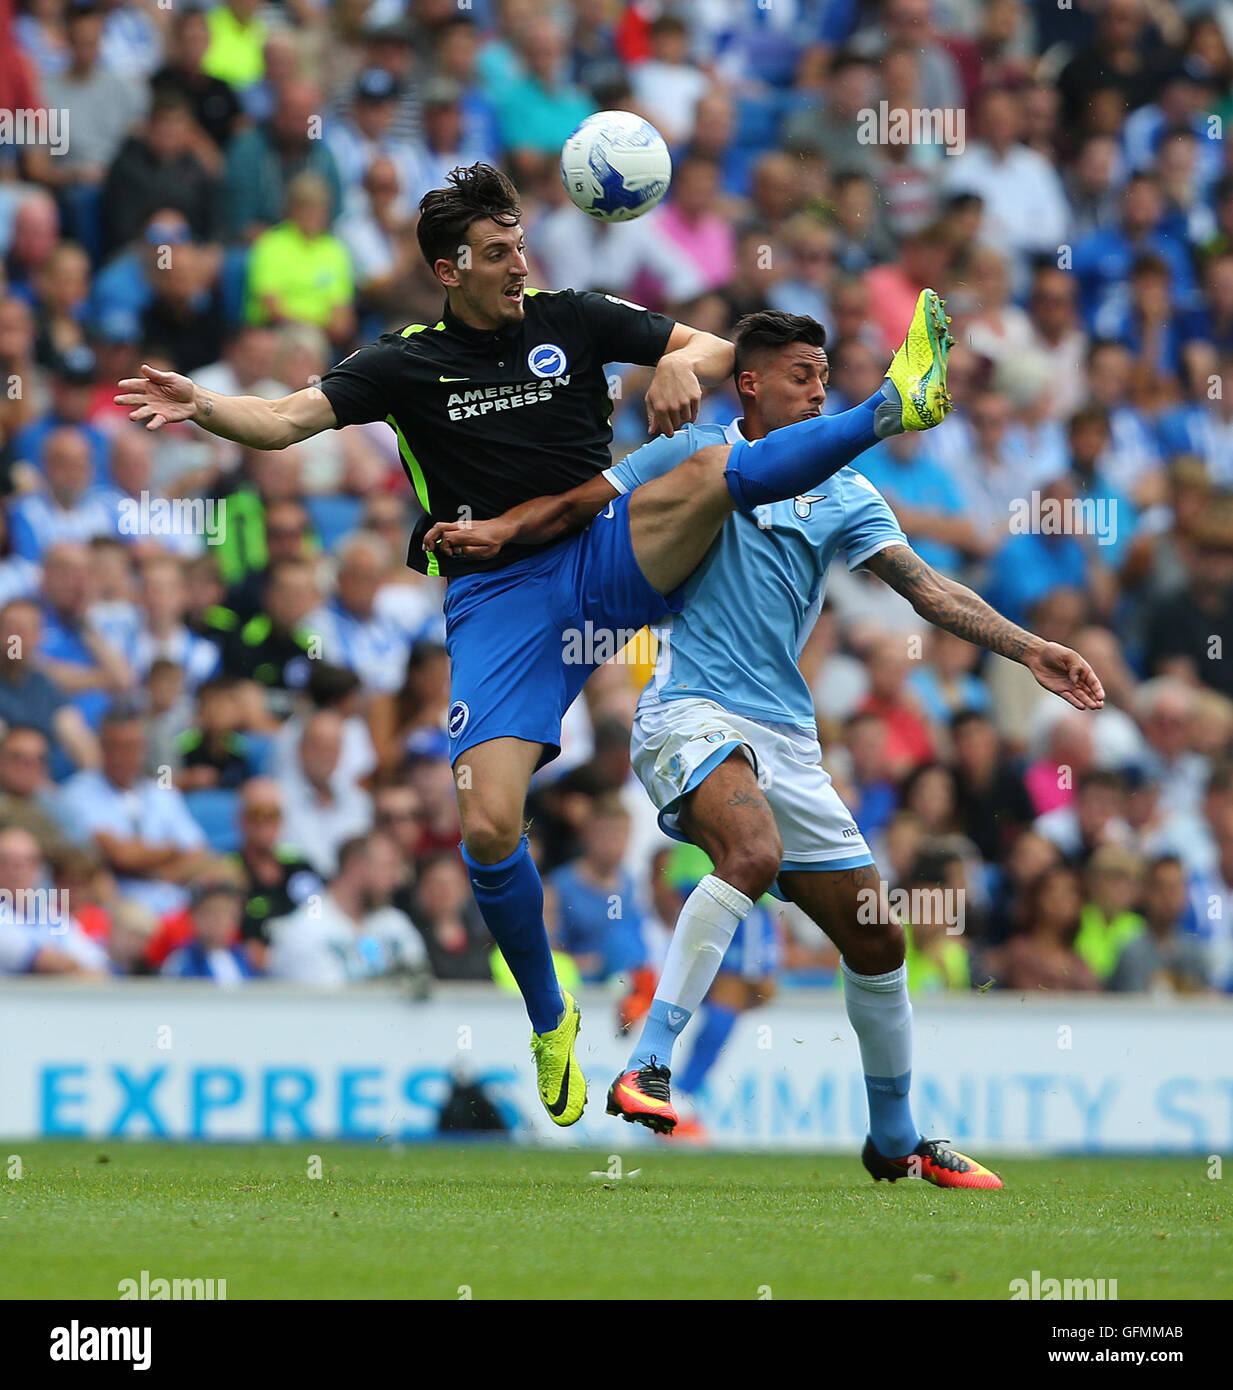 American Express Stadium, Brighton, Great Britain. 31st July 2016. Lewis Dunk ( L ) of Brighton and Hove Albion and Ricardo Kishna of Lazio challenge for the ball during a Pre-Season friendly match. Credit:  Tony Rogers/Alamy Live News Stock Photo